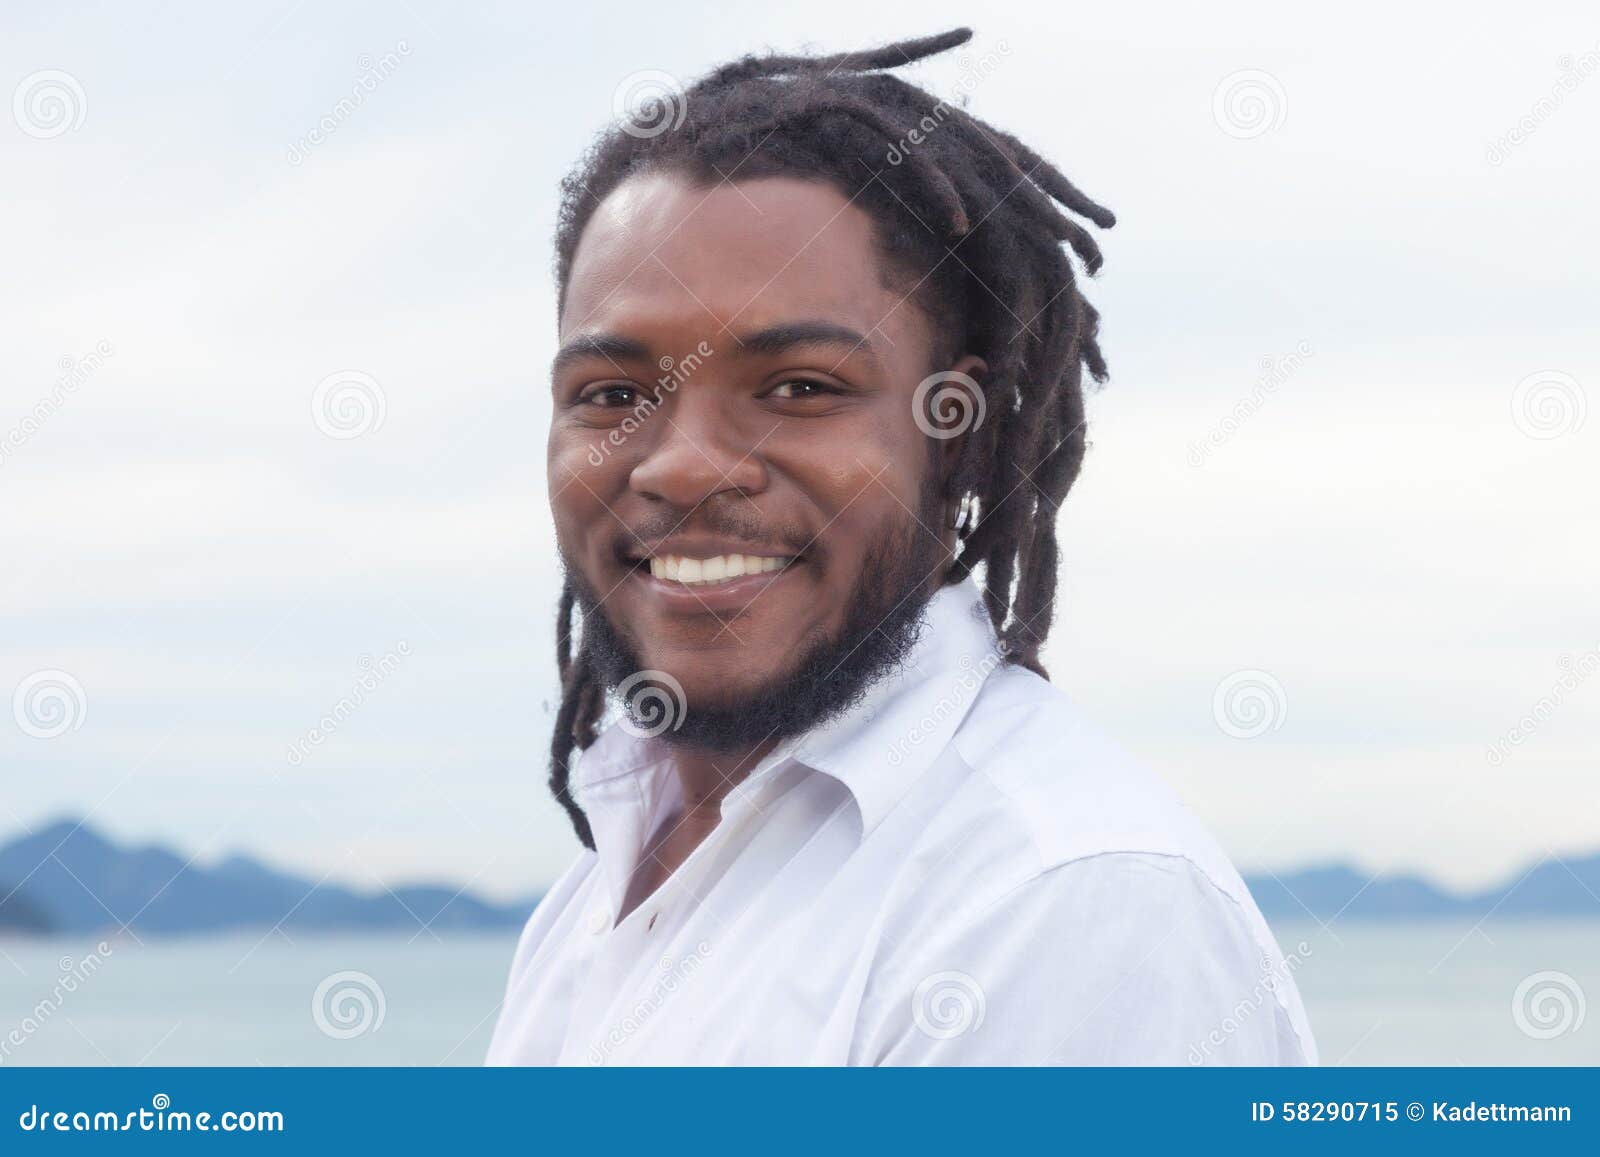 Laughing African American Guy With Dreadlocks And White